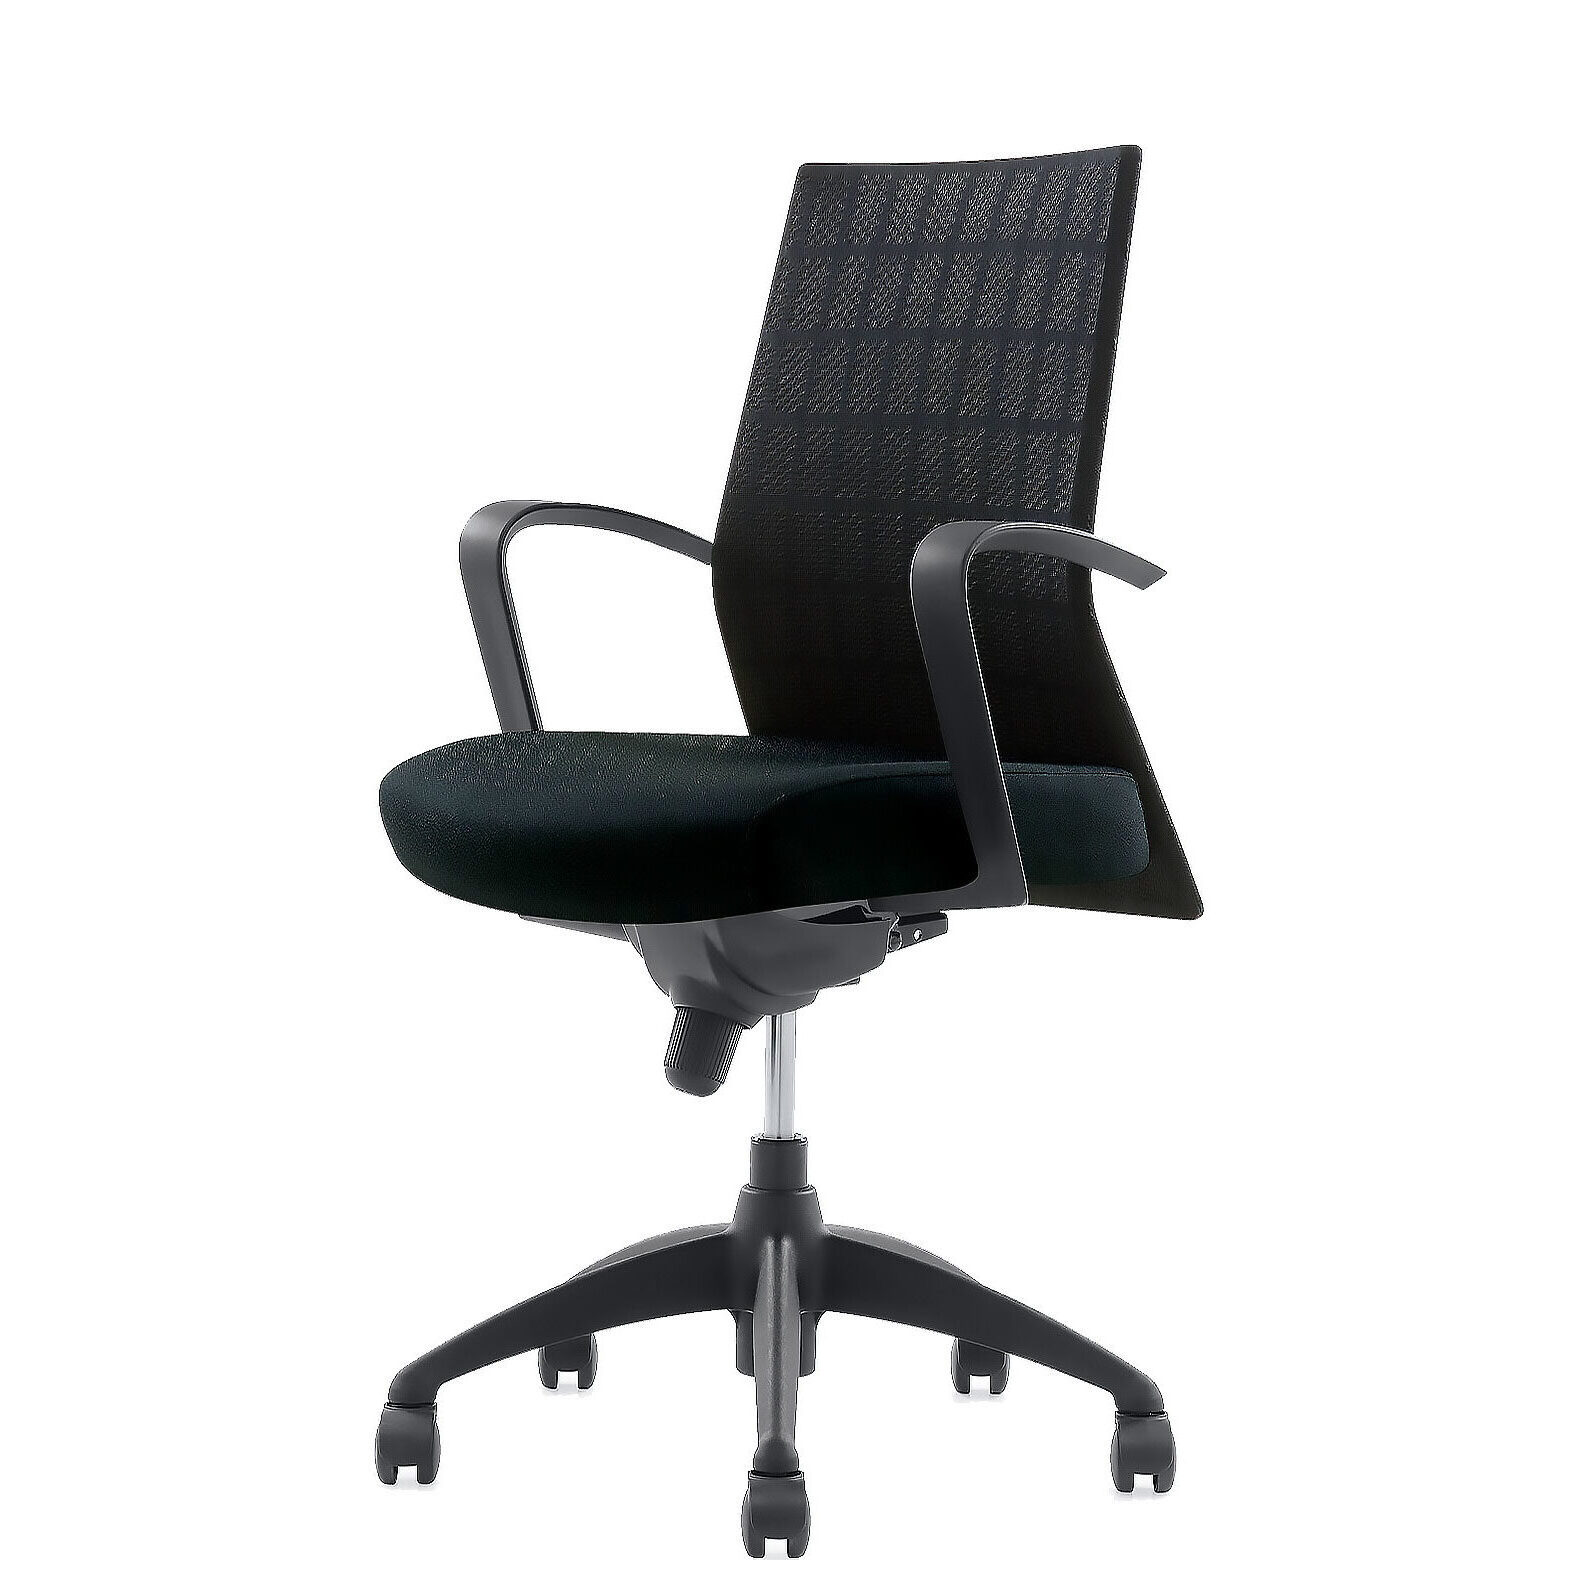 Shop kurg Dorso S-Line Conference Chairs